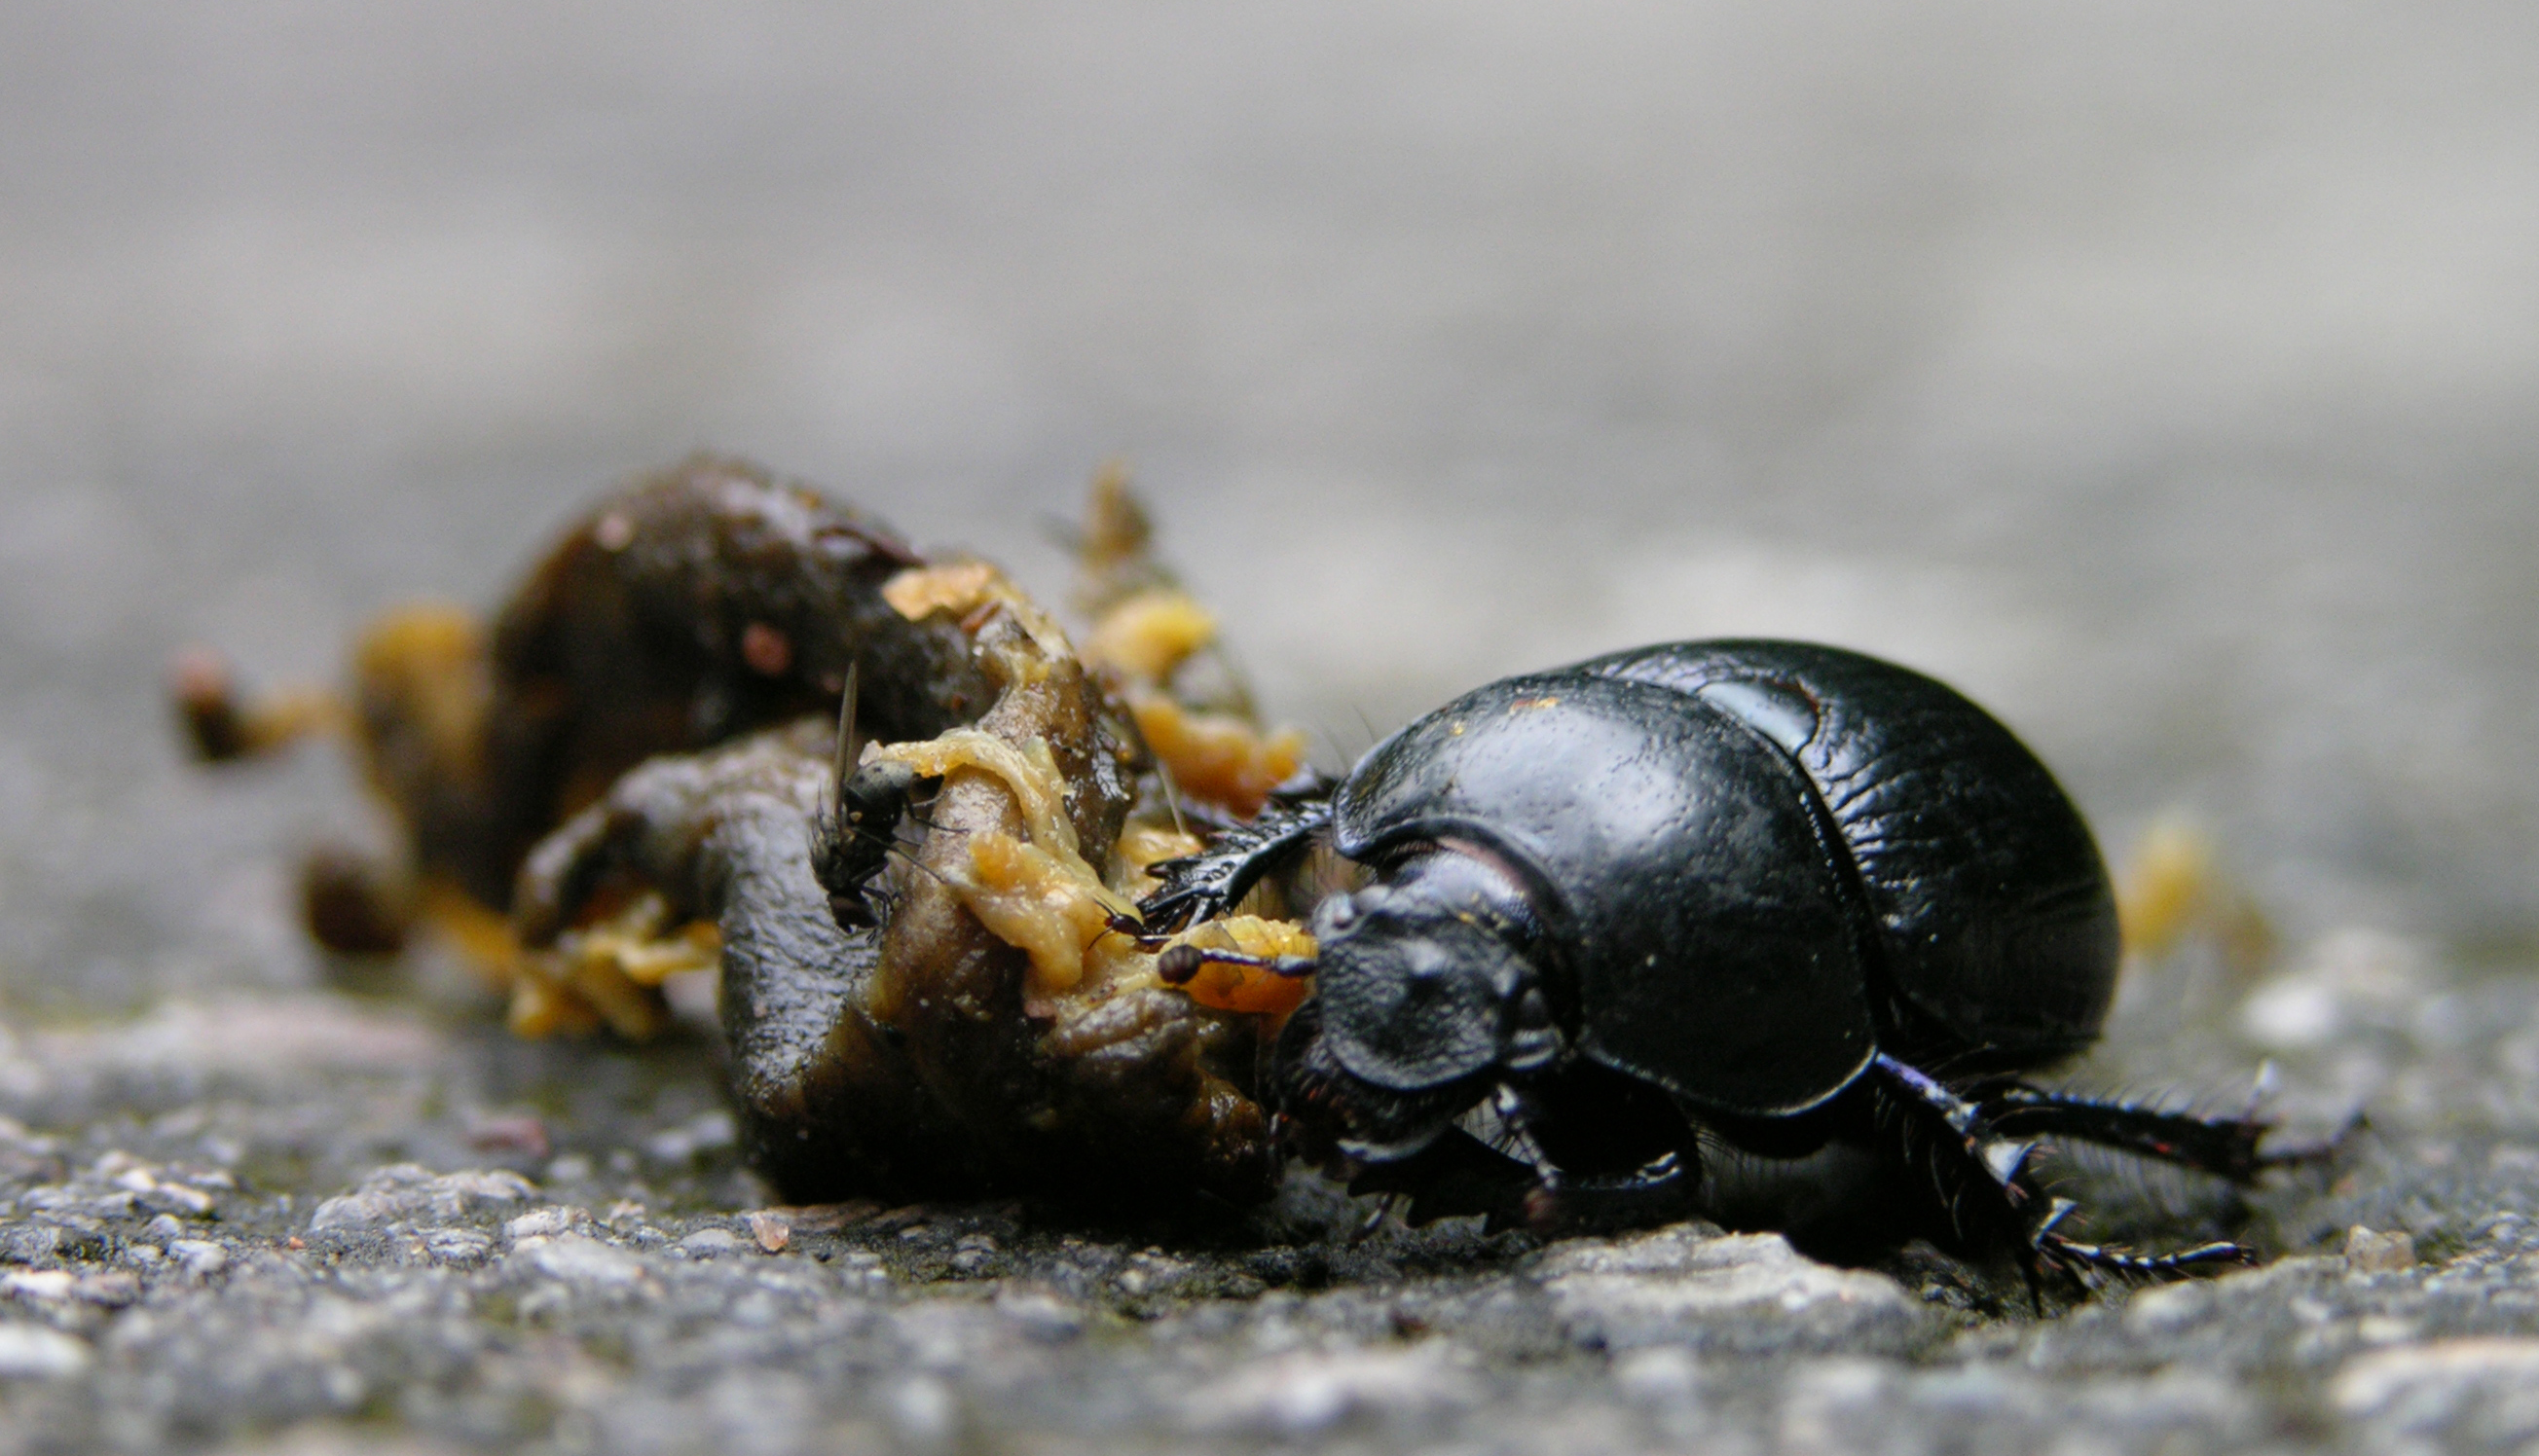 File:Bug moving dead snail with fly 2.jpg - Wikimedia Commons